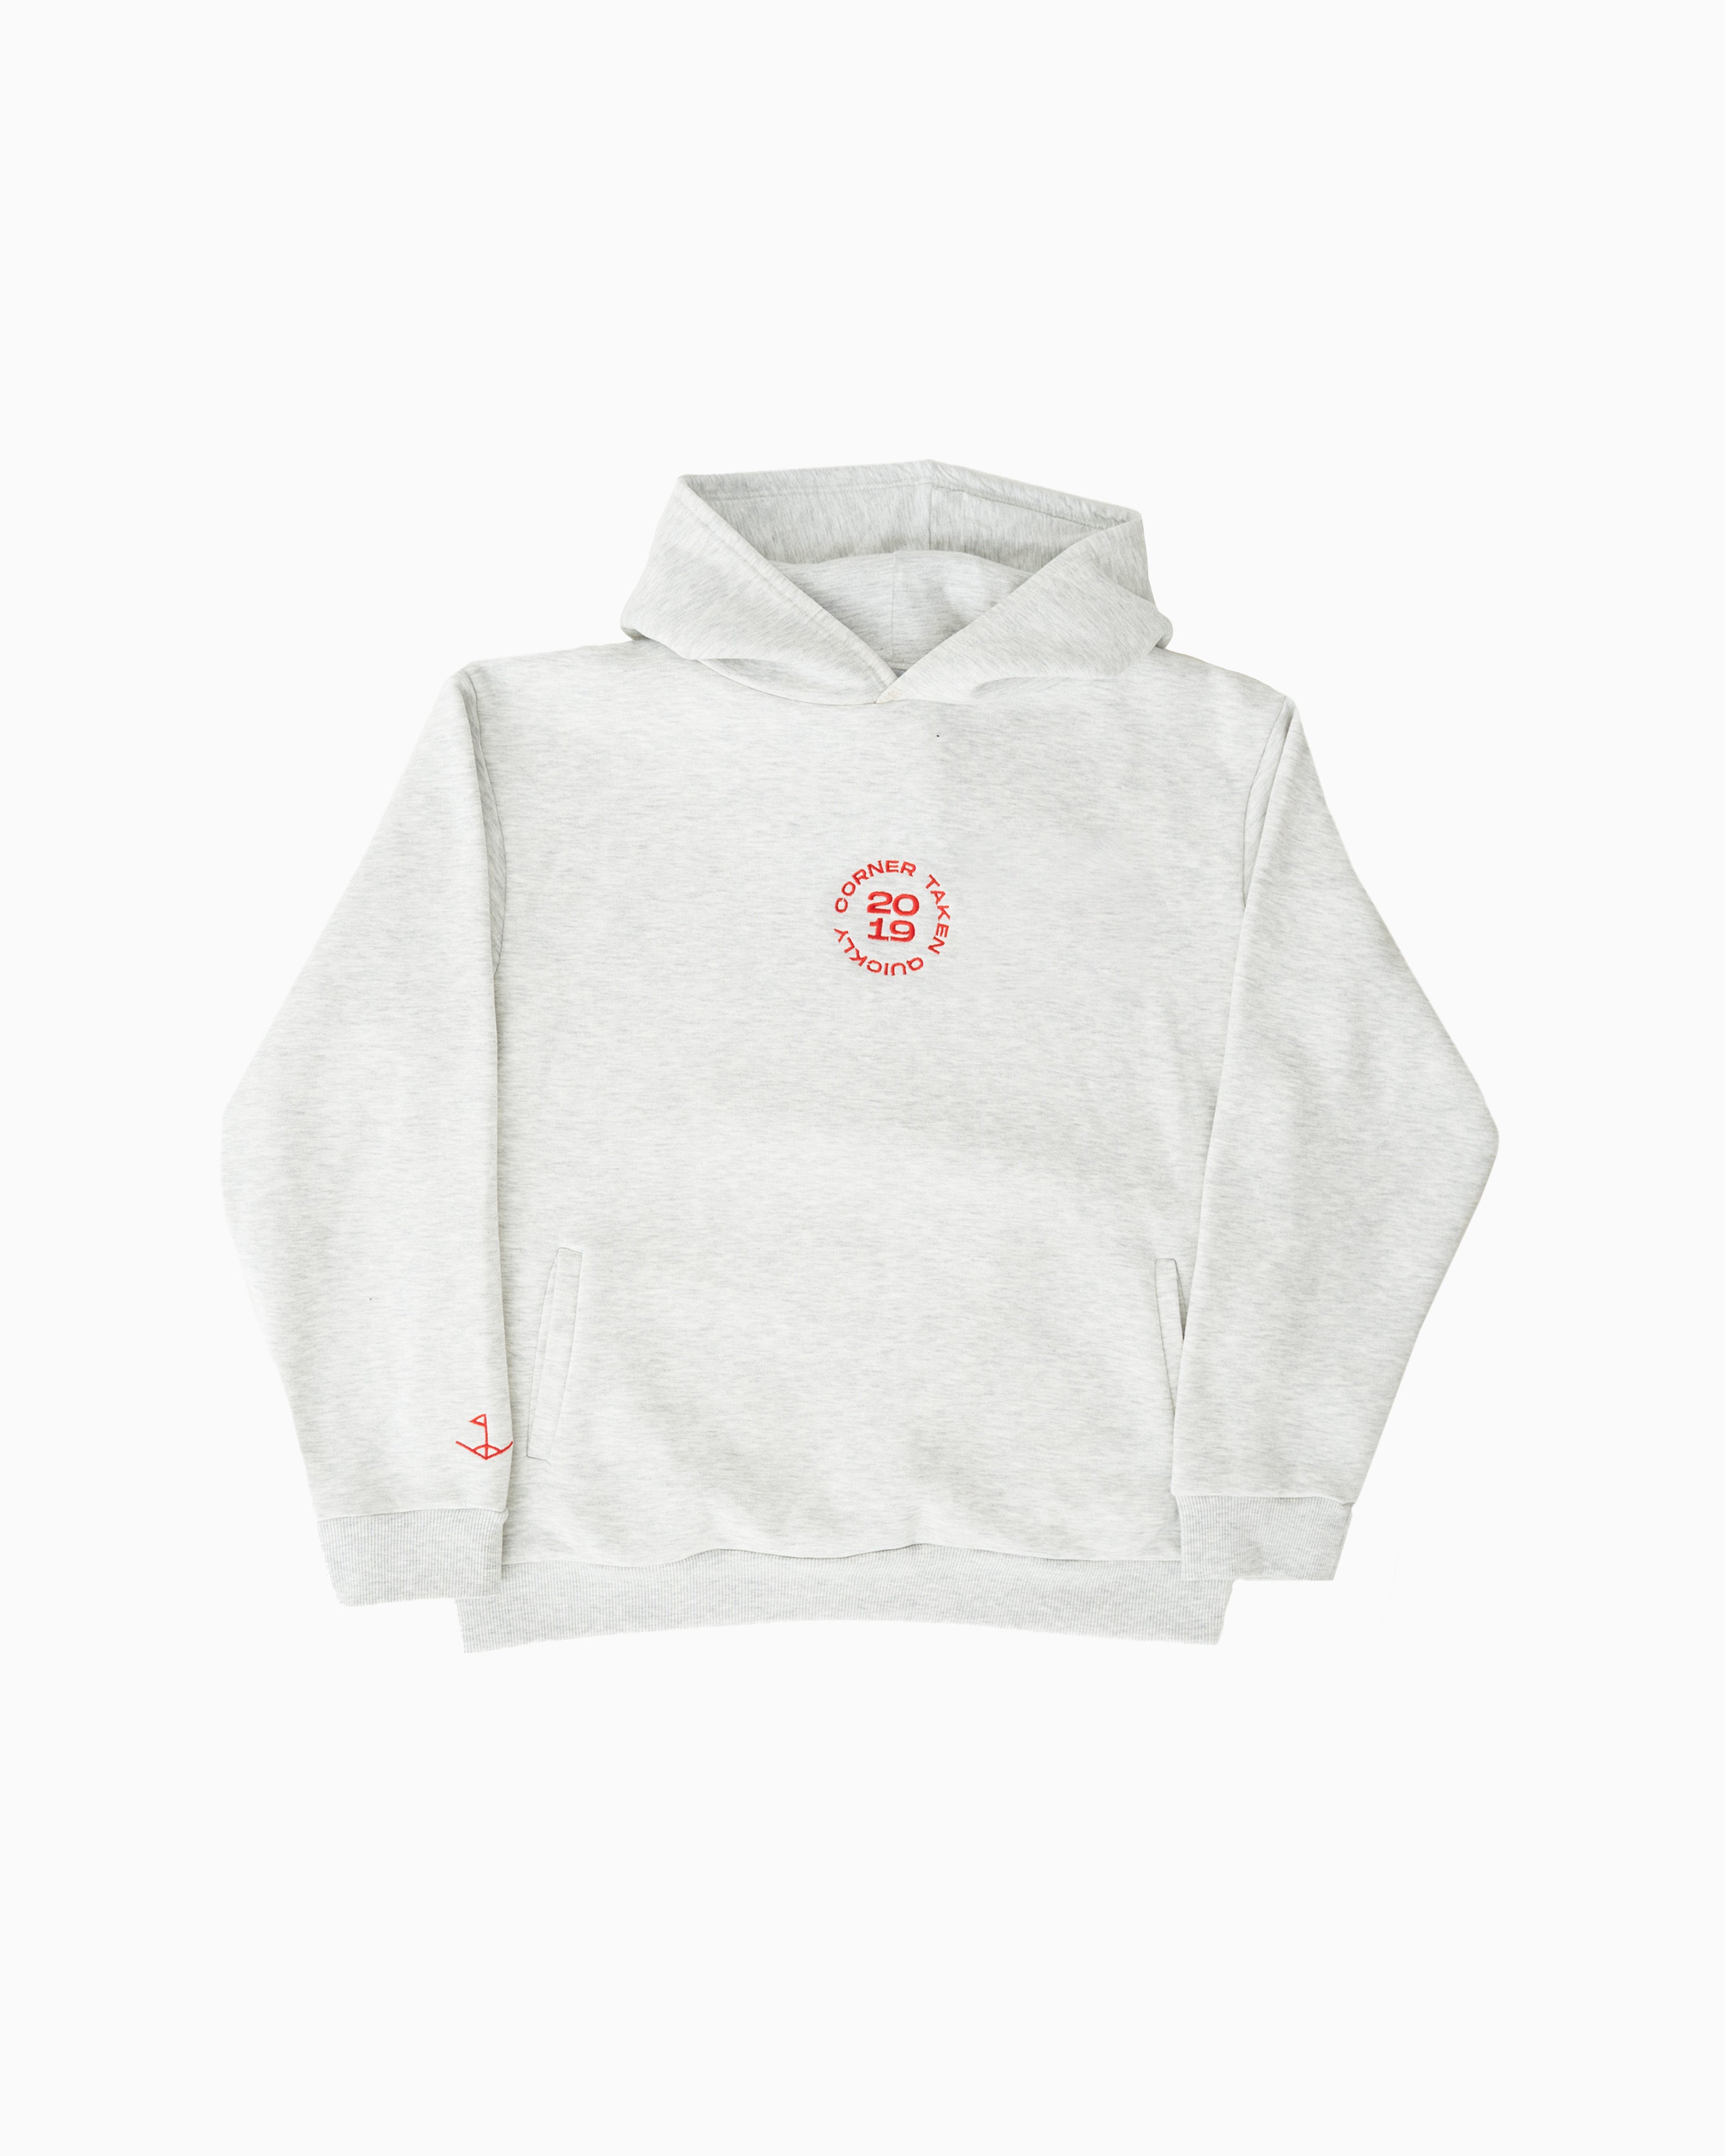 Corner Taken Quickly Embroidery - Hoodie